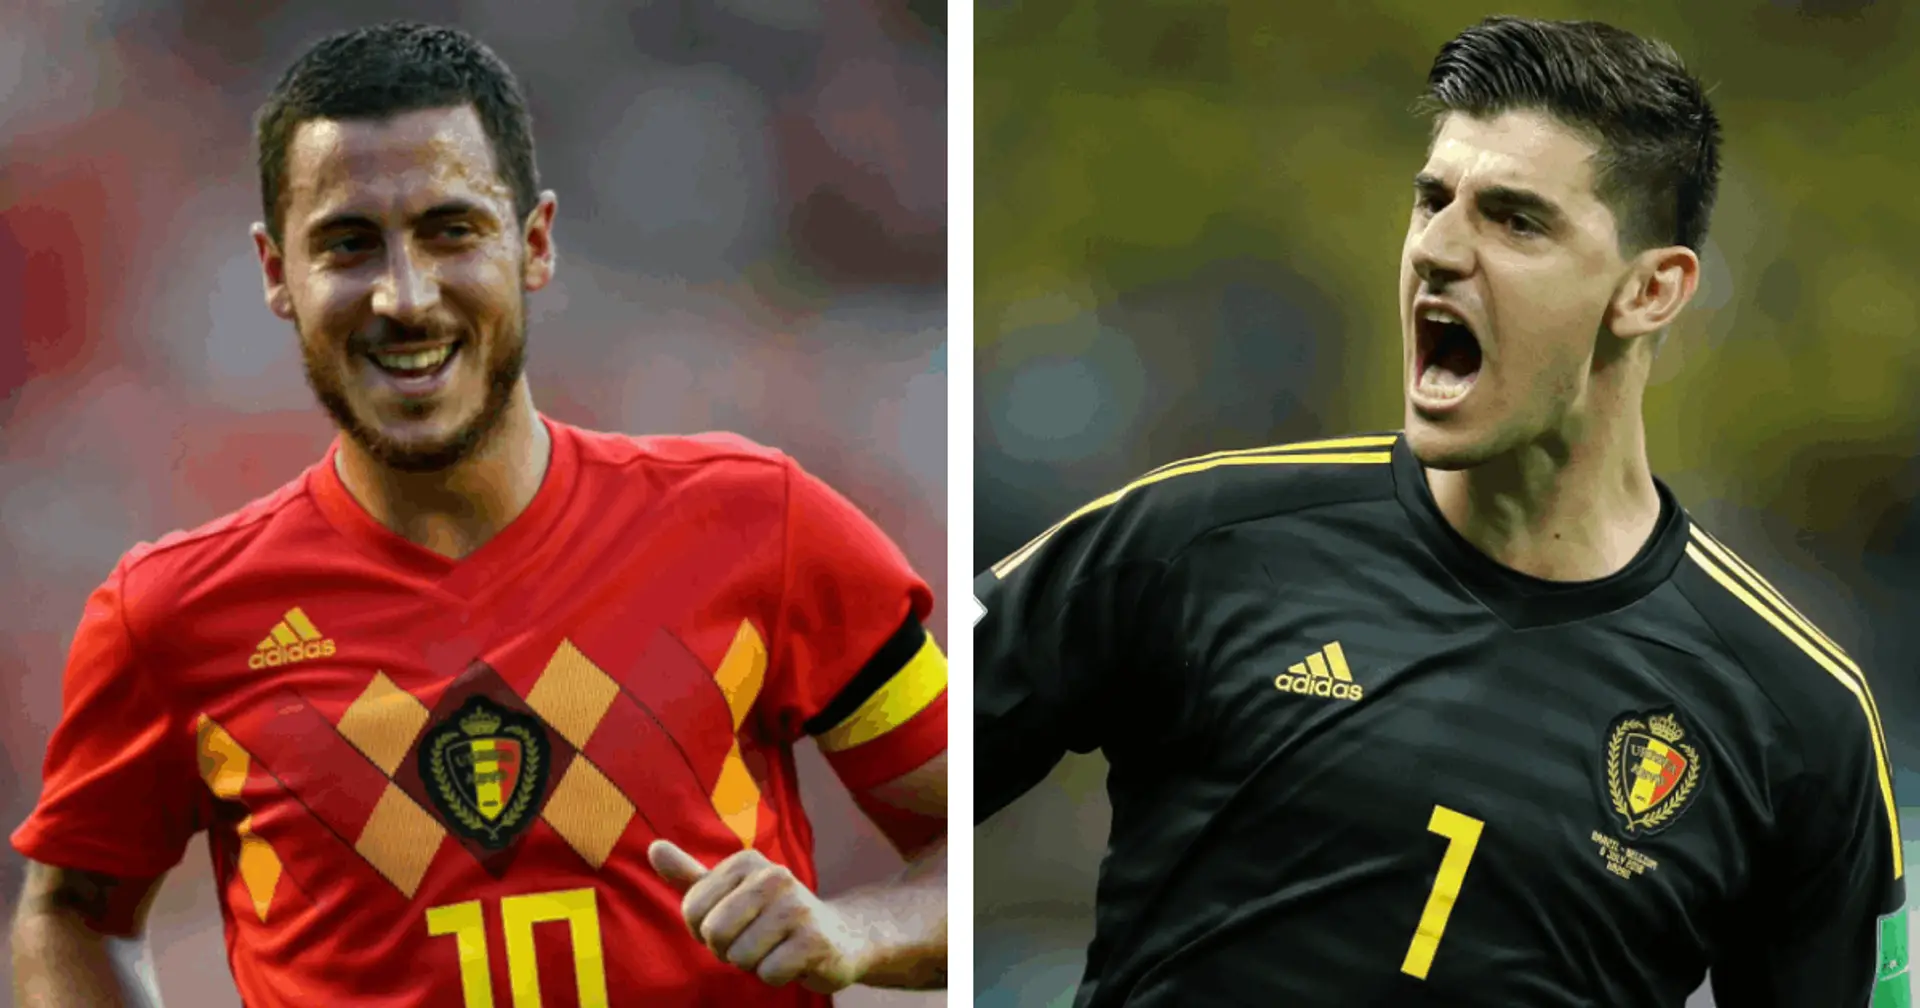 Courtois and Hazard in top 5 most expensive footballers in Belgium squad for Euro 2020 